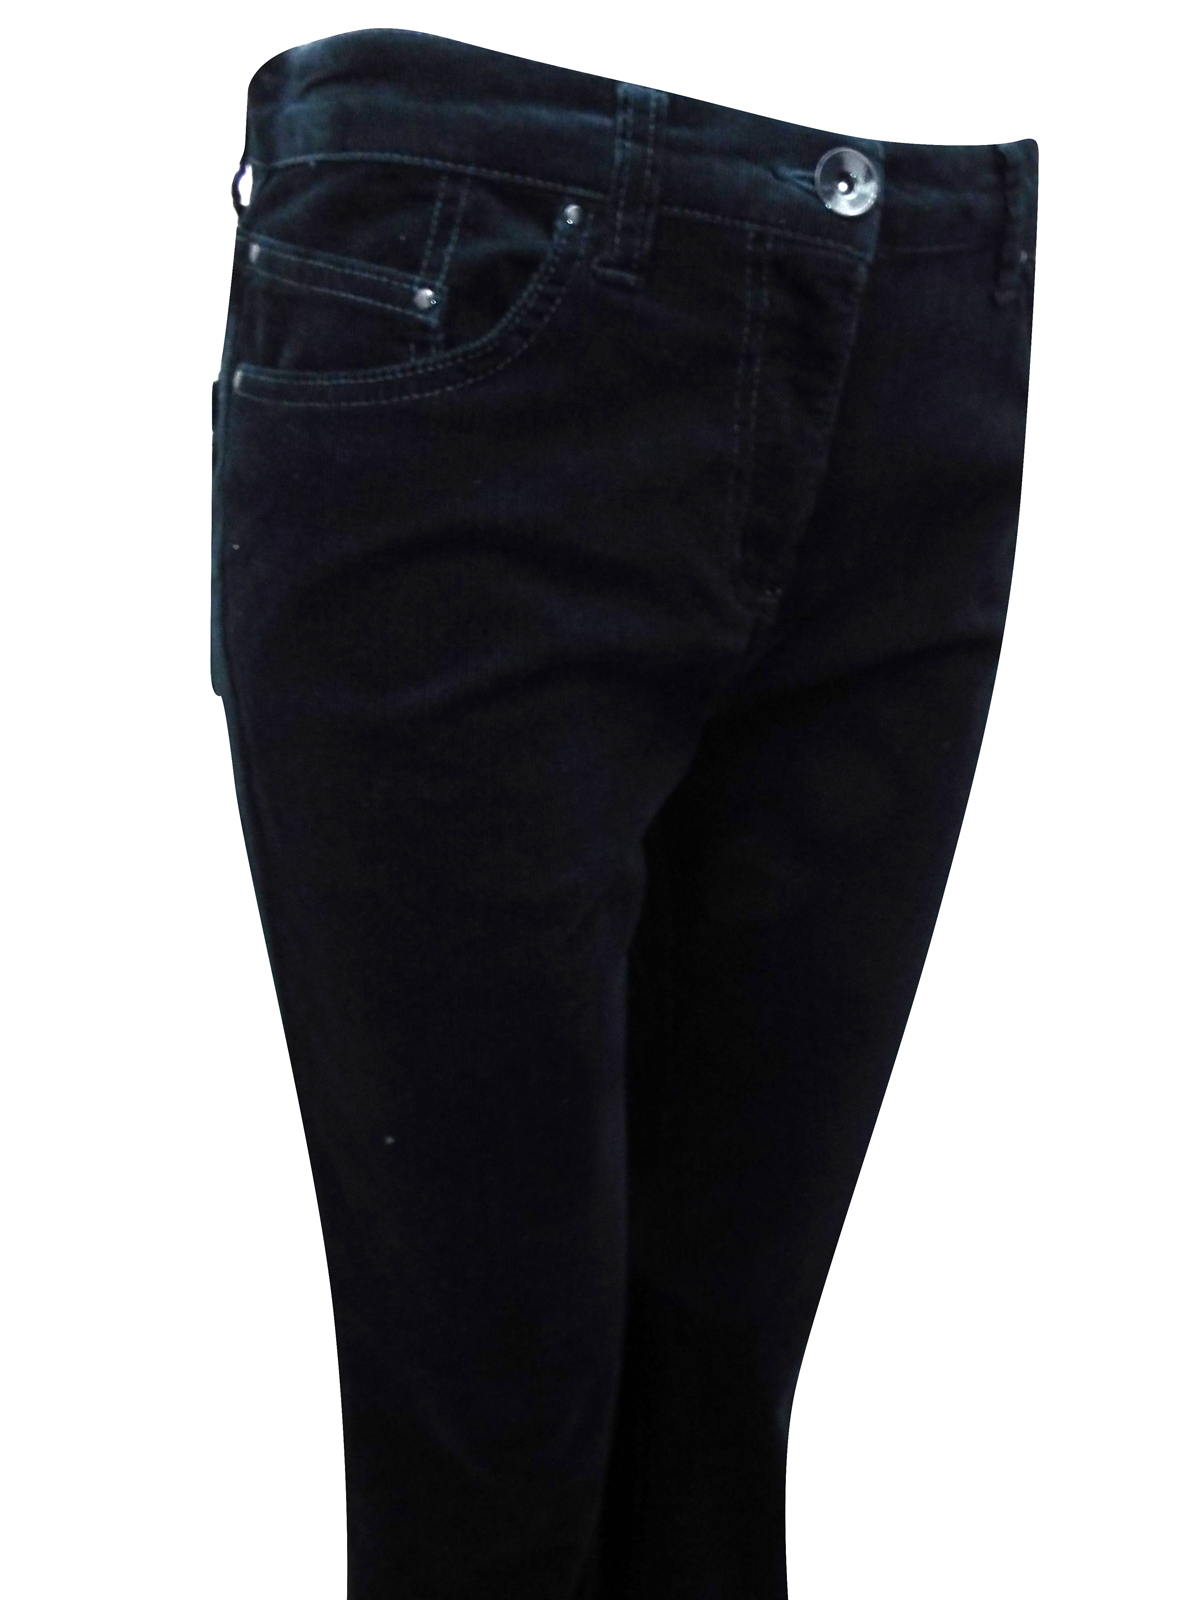 Marks and Spencer - - M&5 NAVY Cotton Rich Cord Bootcut Trousers - Size ...